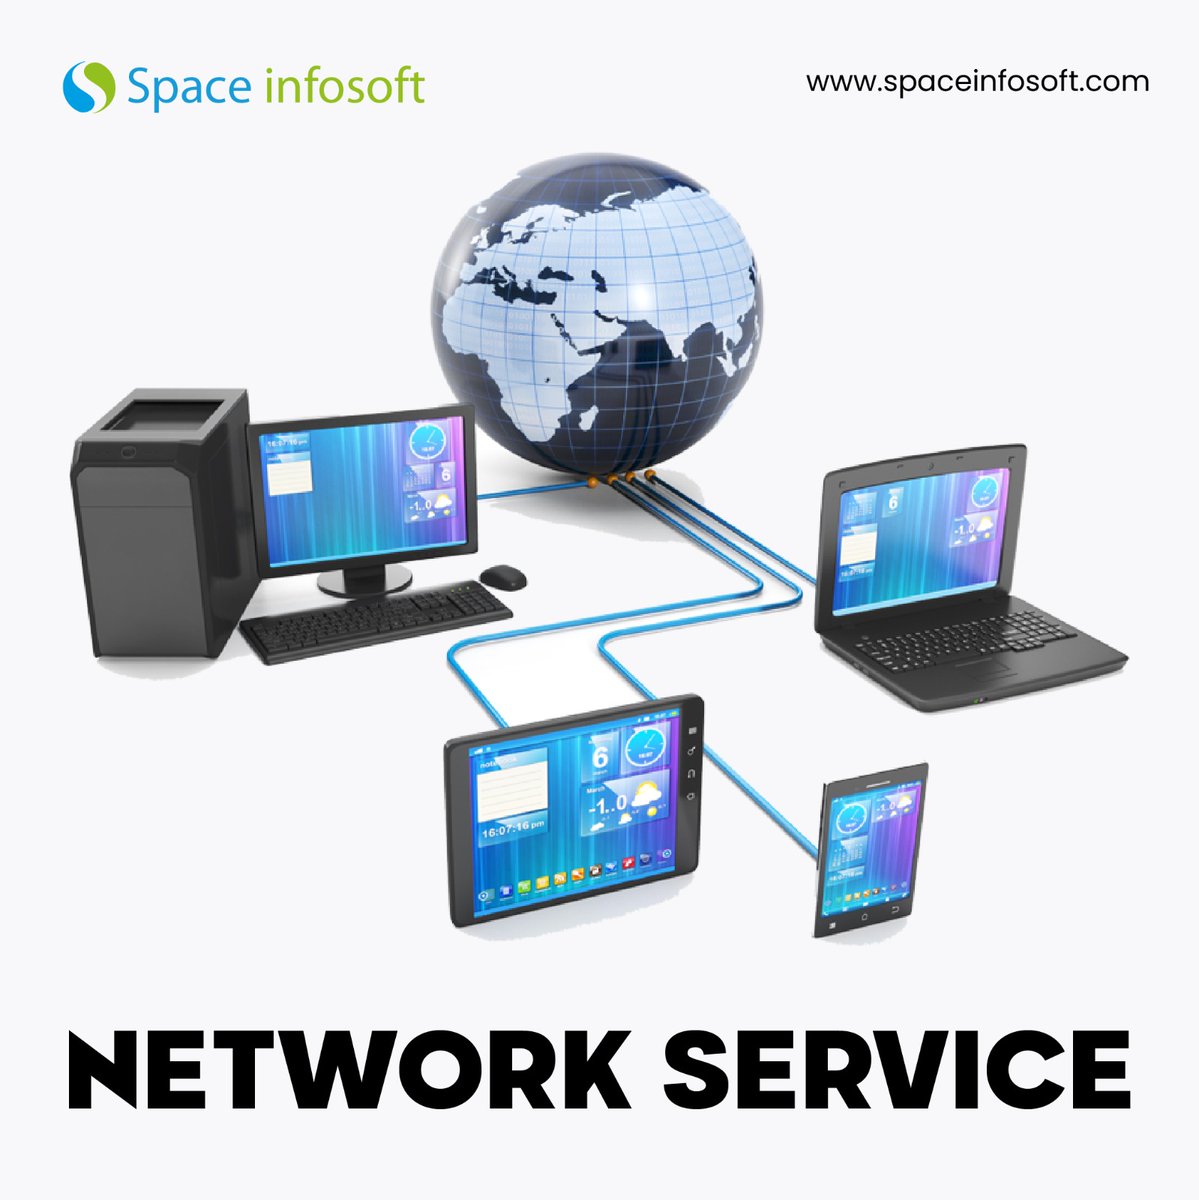 Our services leverage advanced technologies to create a robust and agile network that powers your business to success. Say hello to enhanced connectivity, speed, and efficiency. 
.
.
#spaceinfosoft #networkservices #networksecurity #ITinfrastructure #managednetworks 📈🎯📉